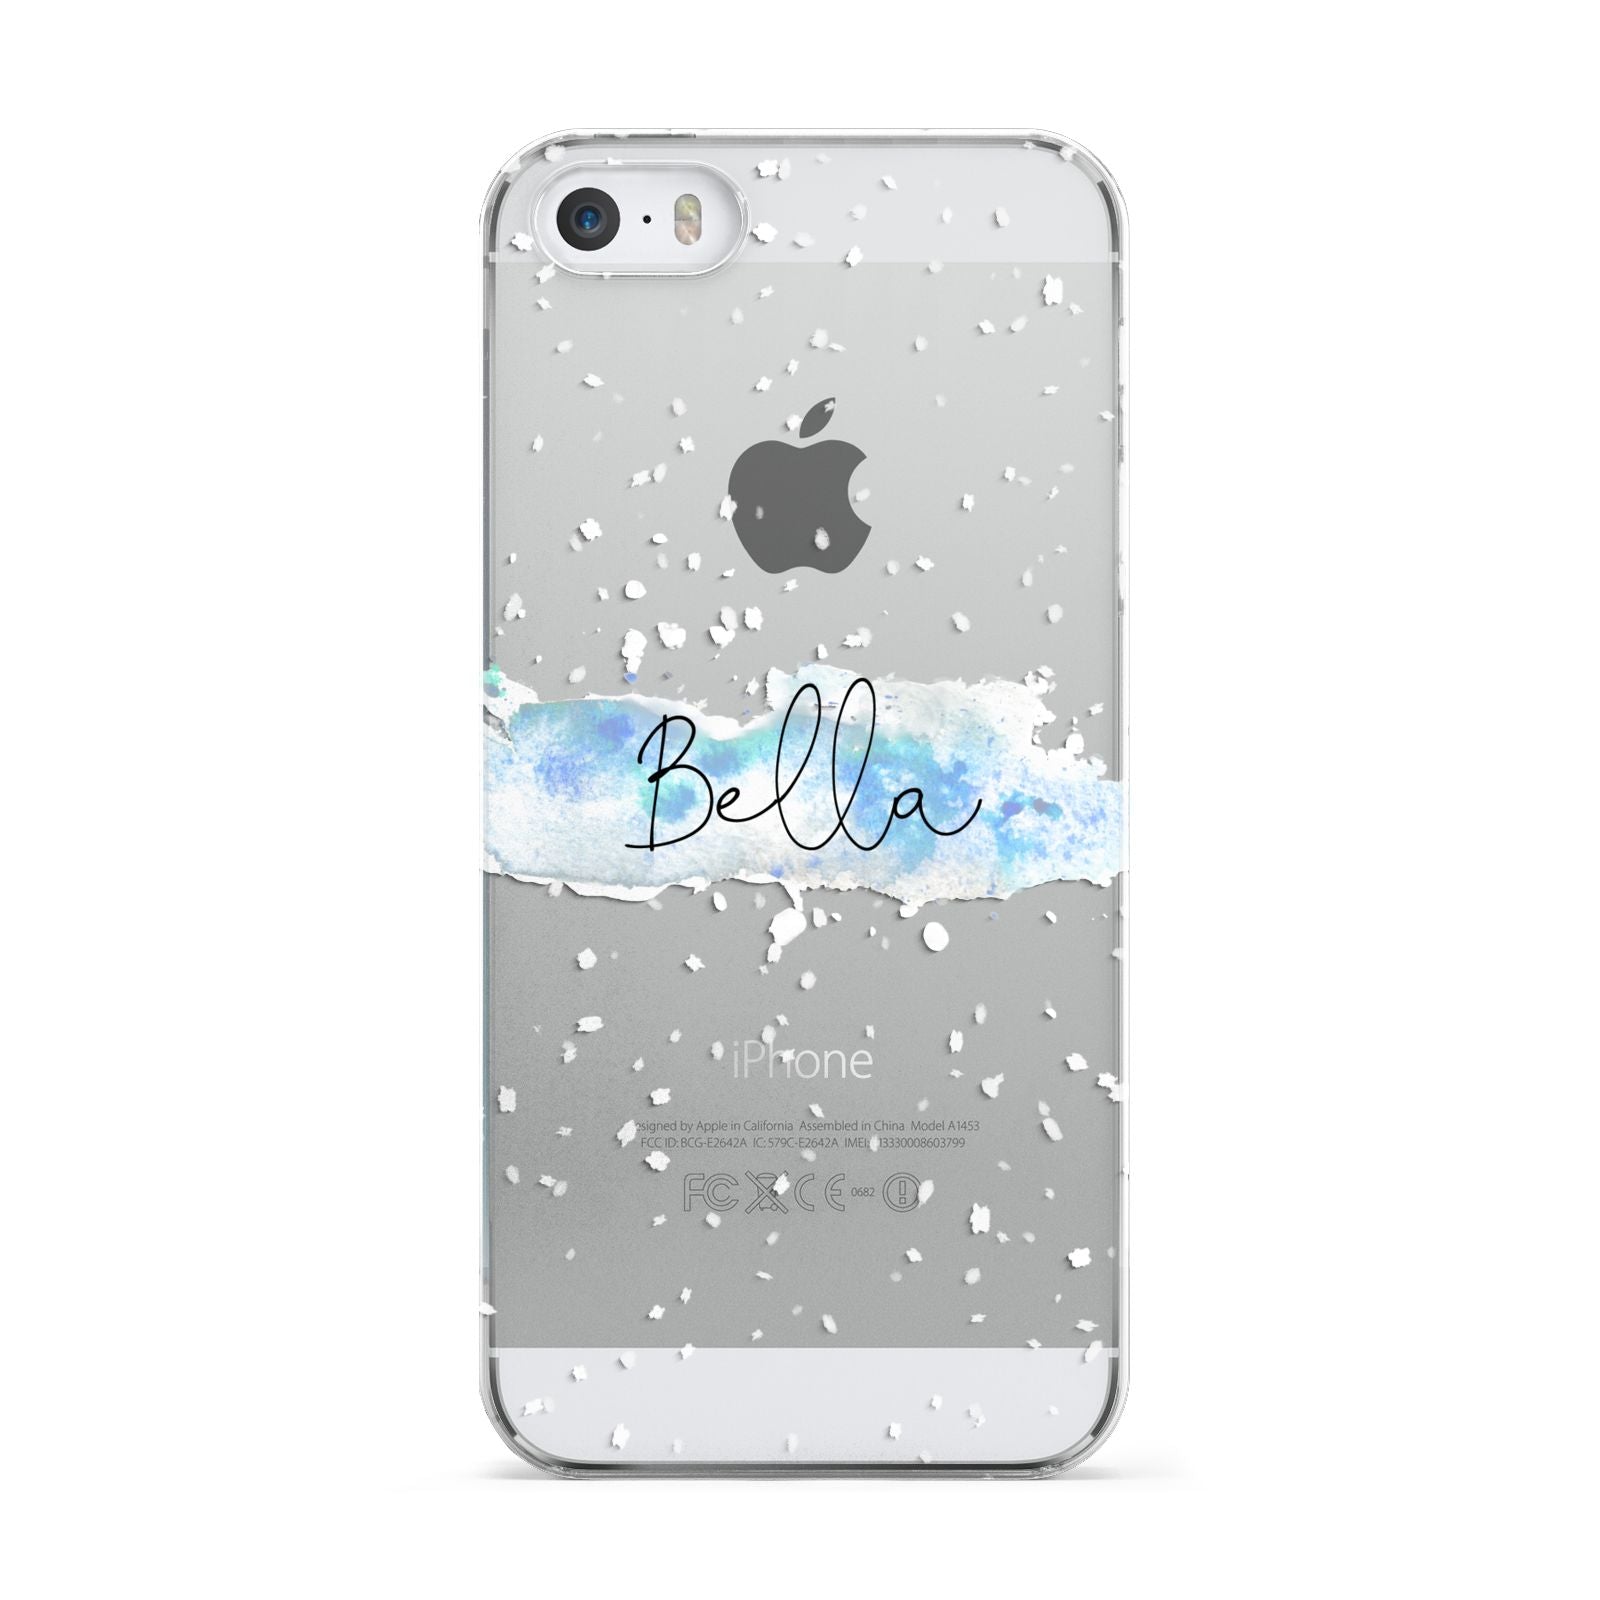 Personalised Christmas Snow fall Apple iPhone 5 Case